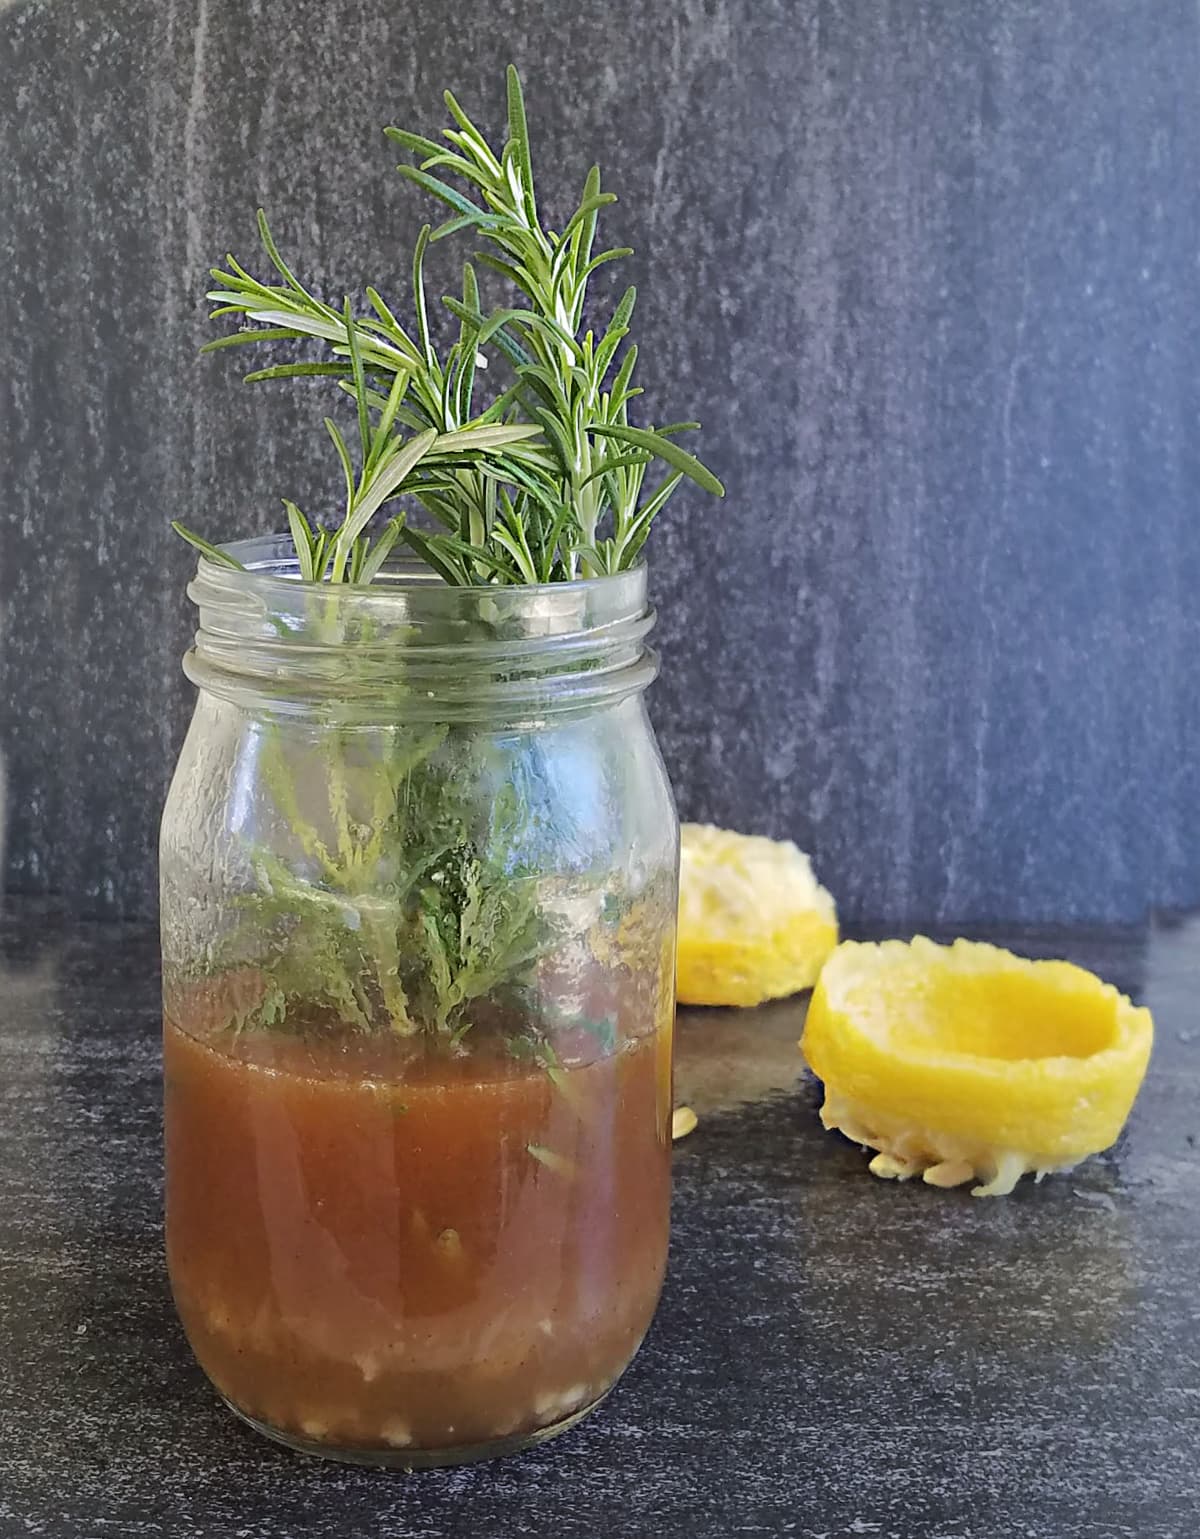 Butter sauce in a mason jar, with fresh rosemary sticking out the top.